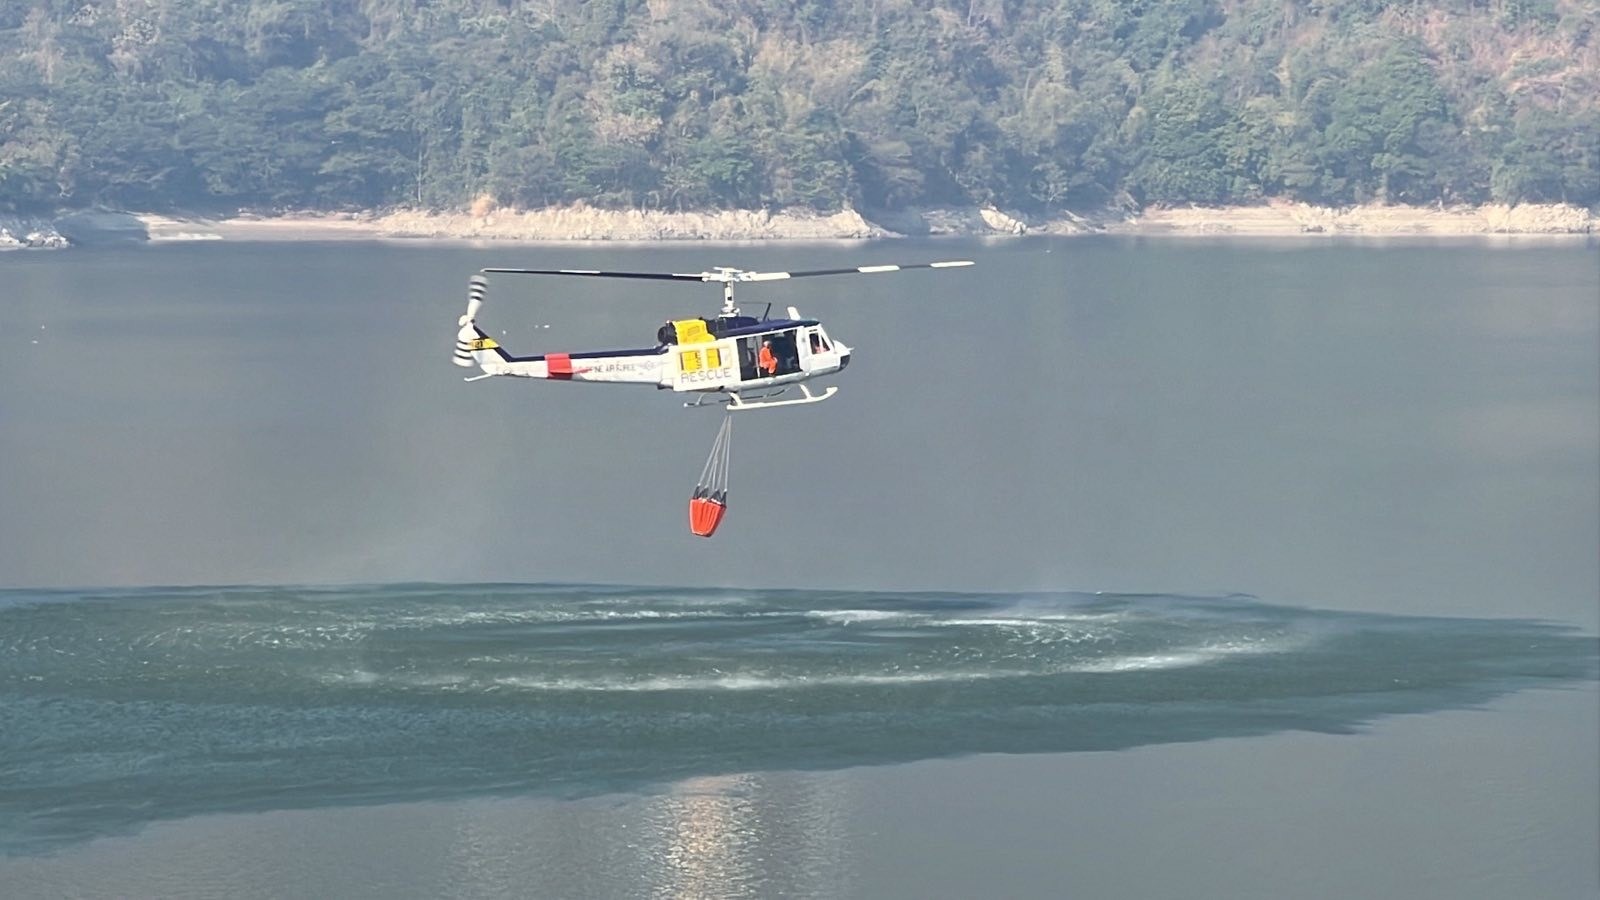 The Philippine Air Force (PAF) on Wednesday said it continued its heli bucket operations in Benguet to suppress the forest fire in the province. 